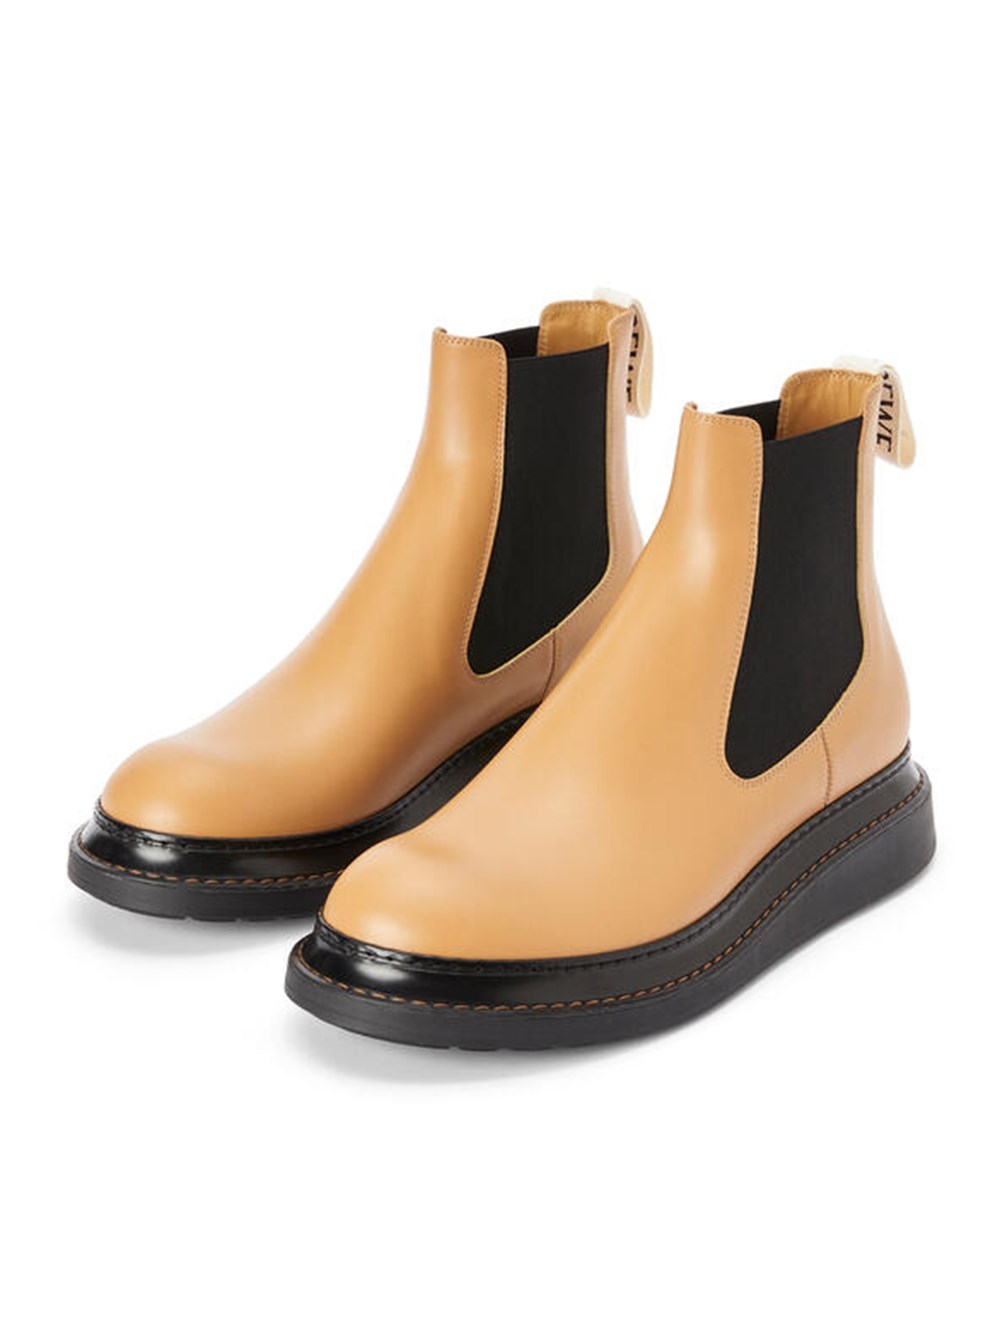 At redigere Imperialisme Mod viljen Loewe Chelsea boots available on Monti Boutique - 47780